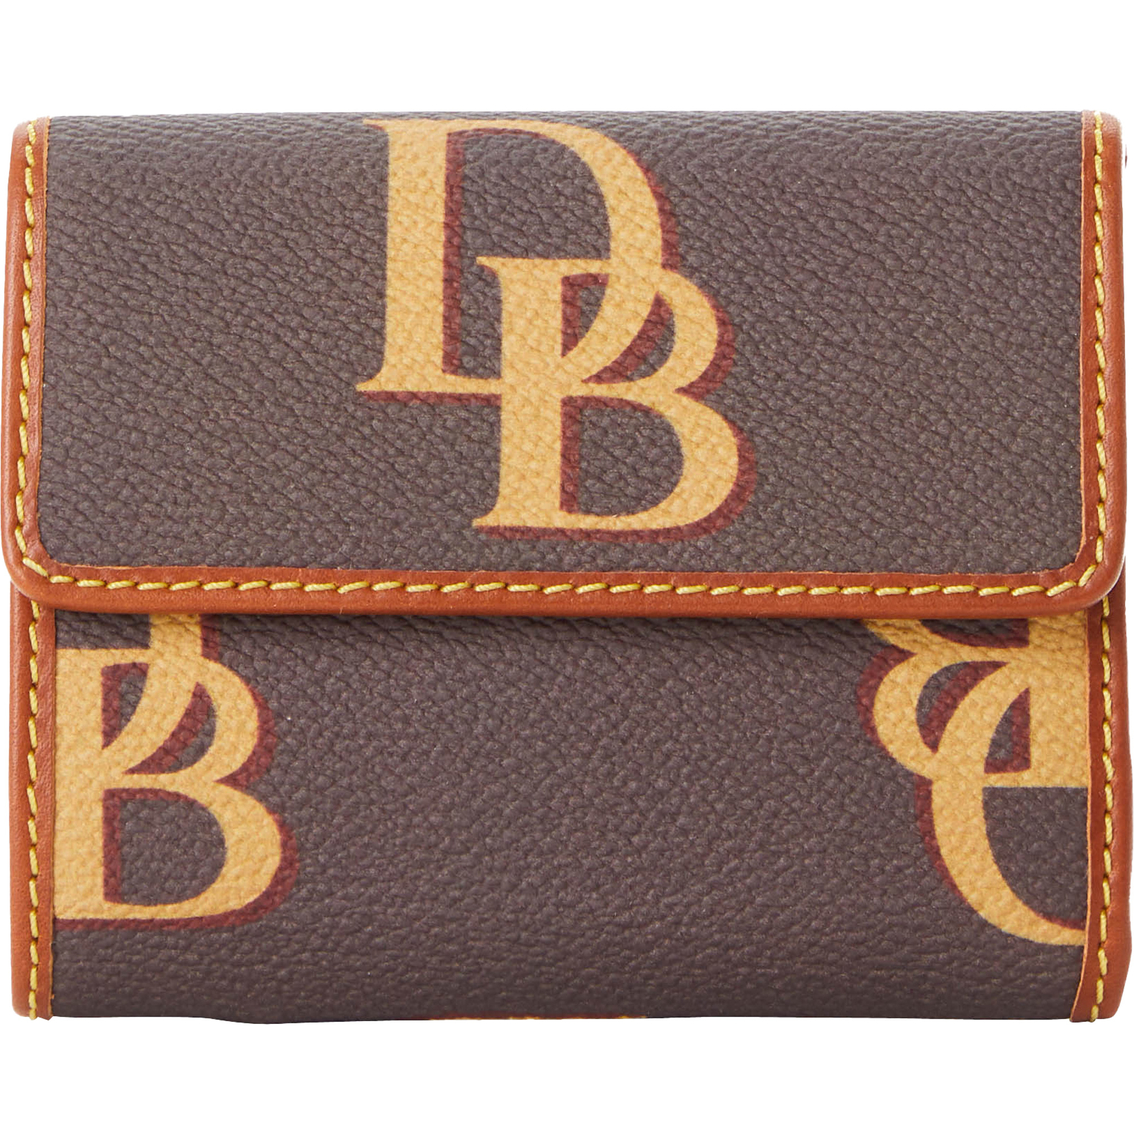 Dooney & Bourke Monogram Small Flap Wallet, Wristlets, Clutches, Clothing  & Accessories